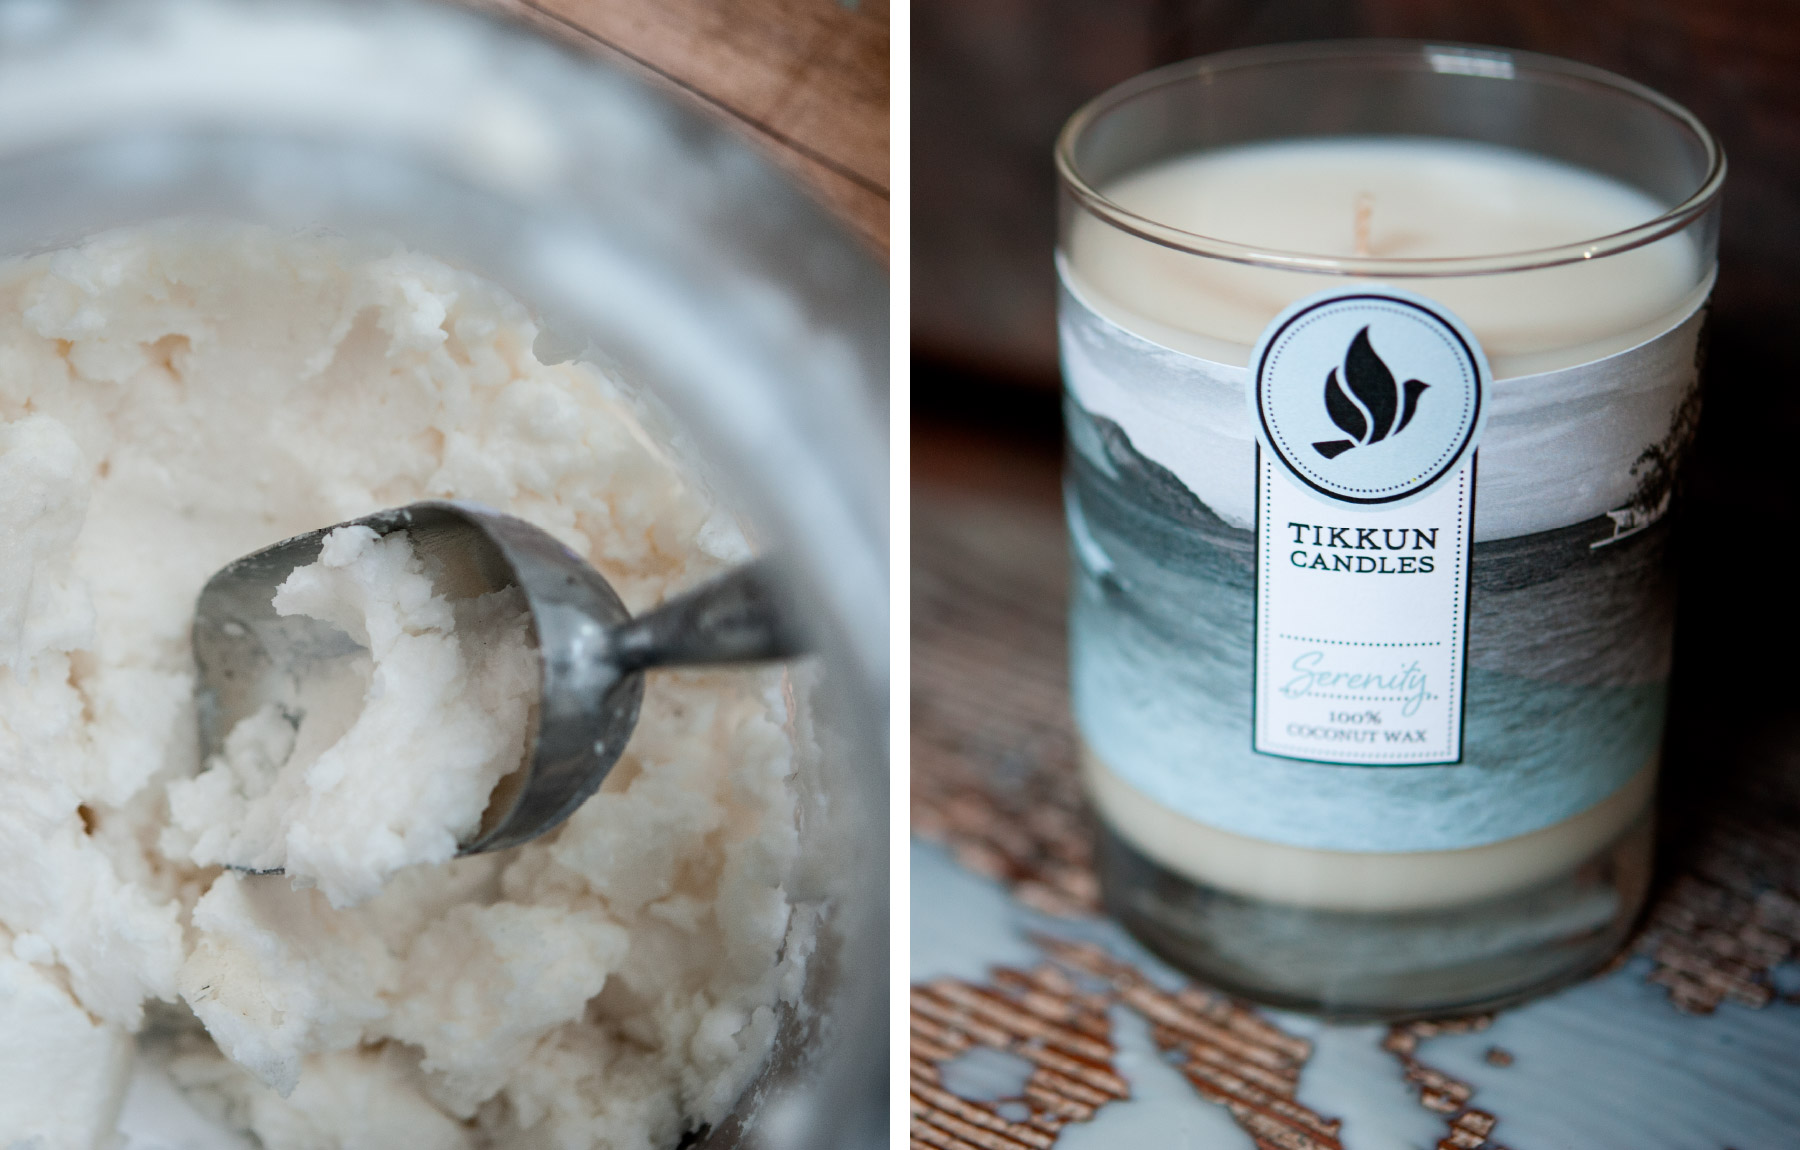 Coconut wax with serenity candle